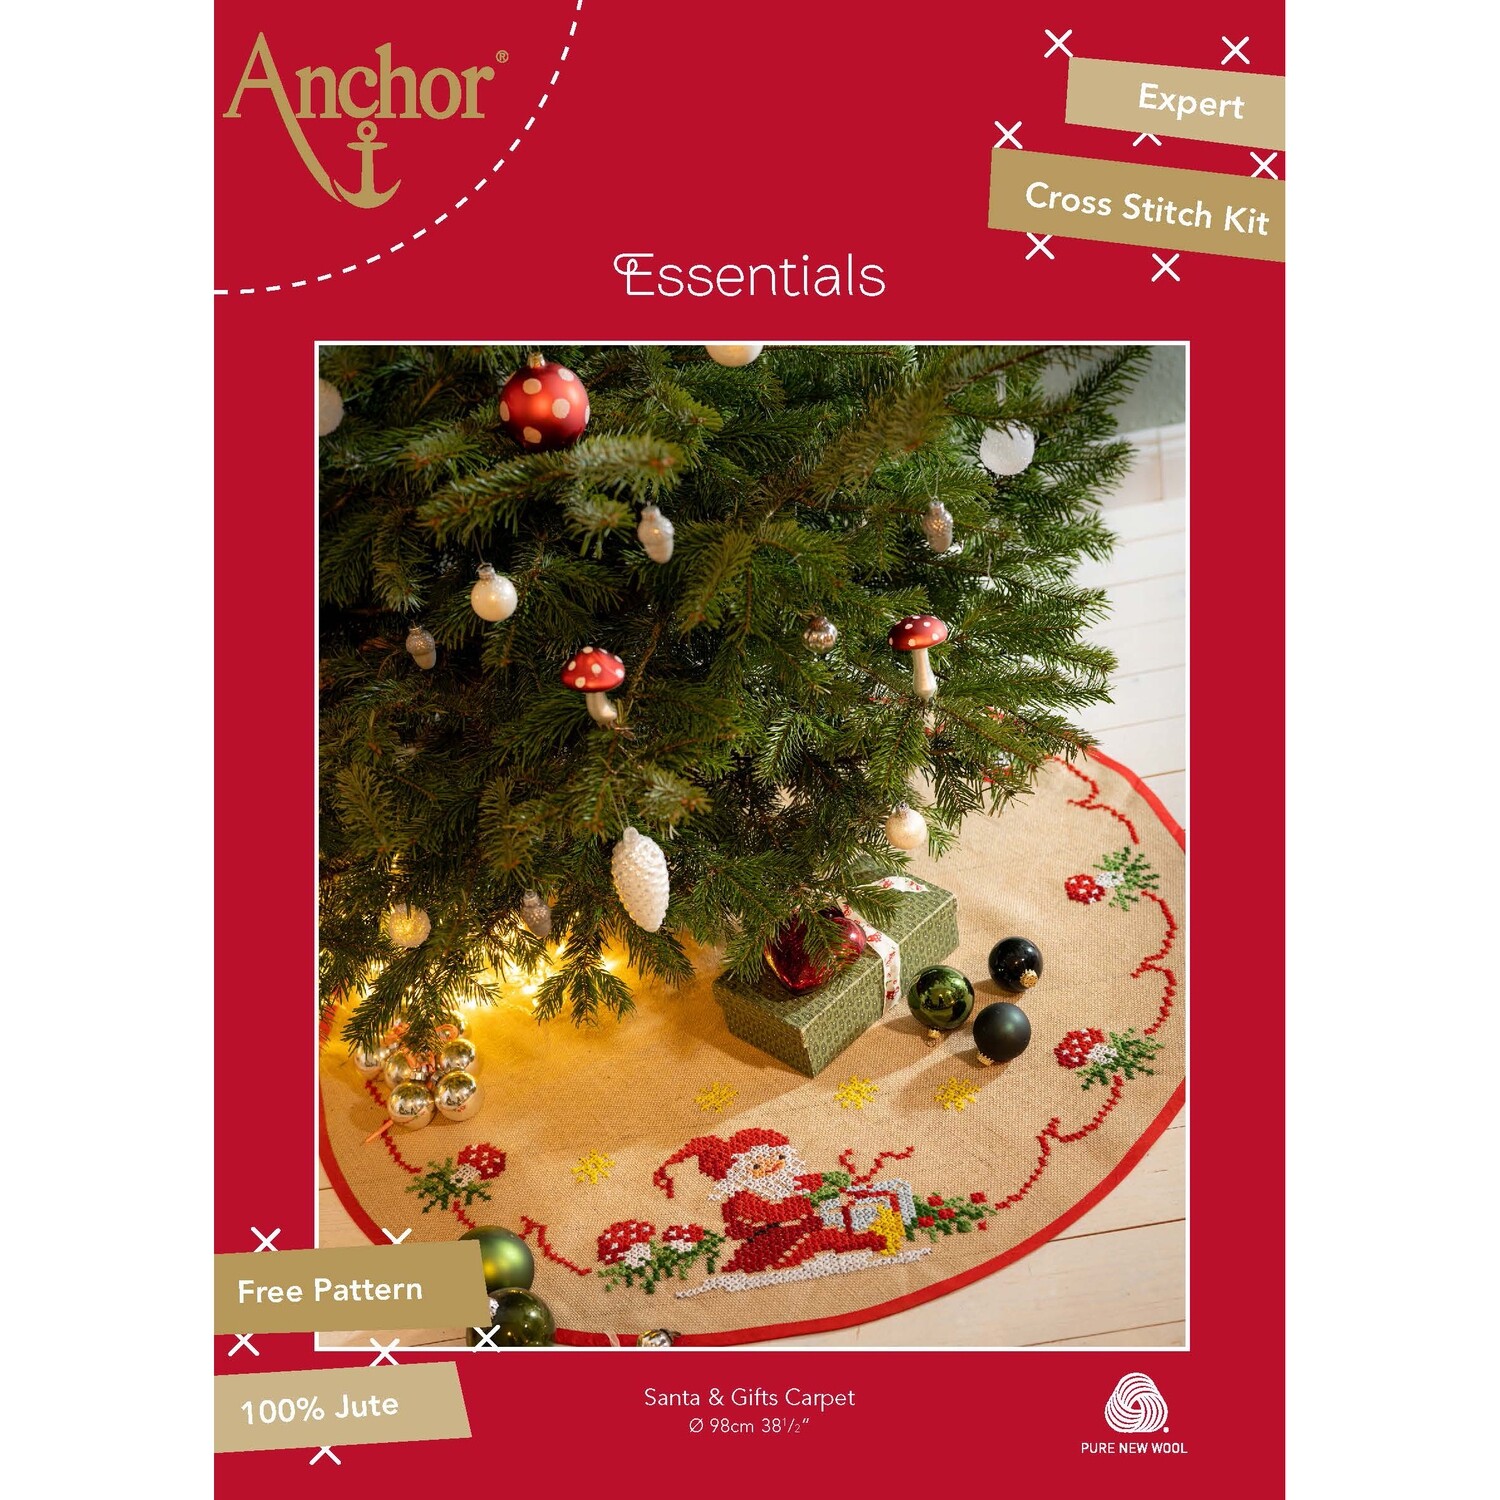 Anchor Essentials Freestyle Kit - Santa and Gifts Christmas Tree Carpet